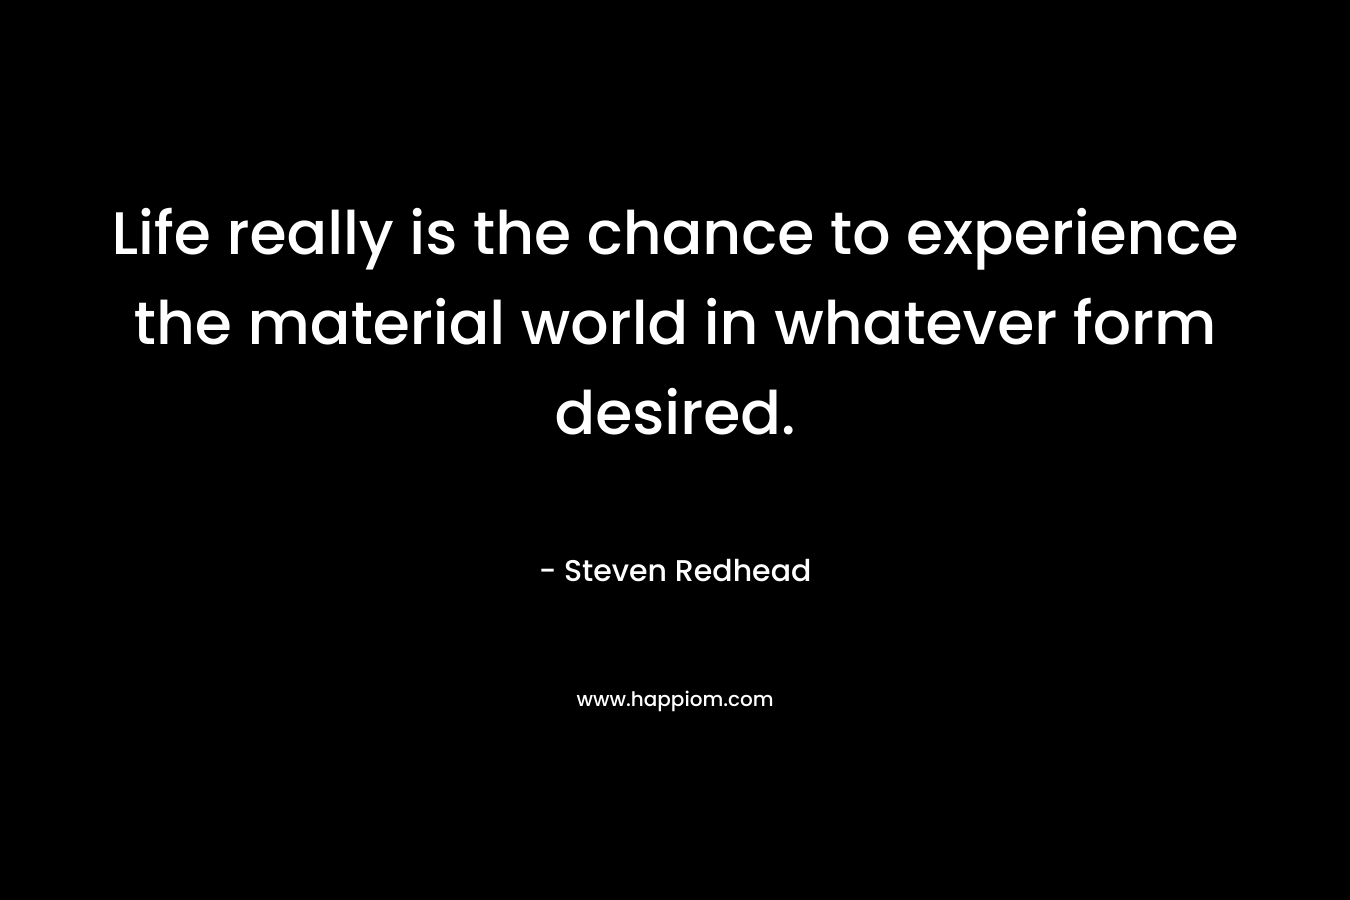 Life really is the chance to experience the material world in whatever form desired.